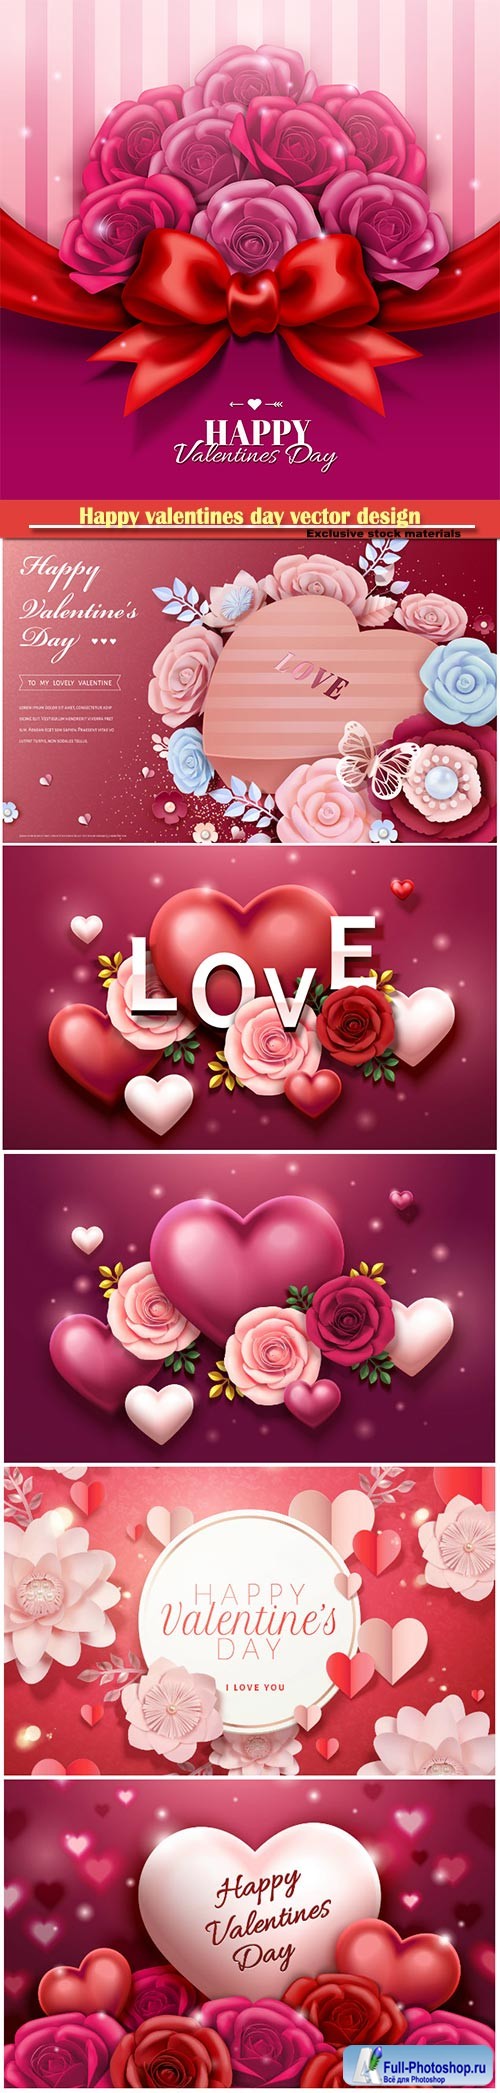 Happy valentines day vector design with heart, balloons, roses in 3d illustration # 2